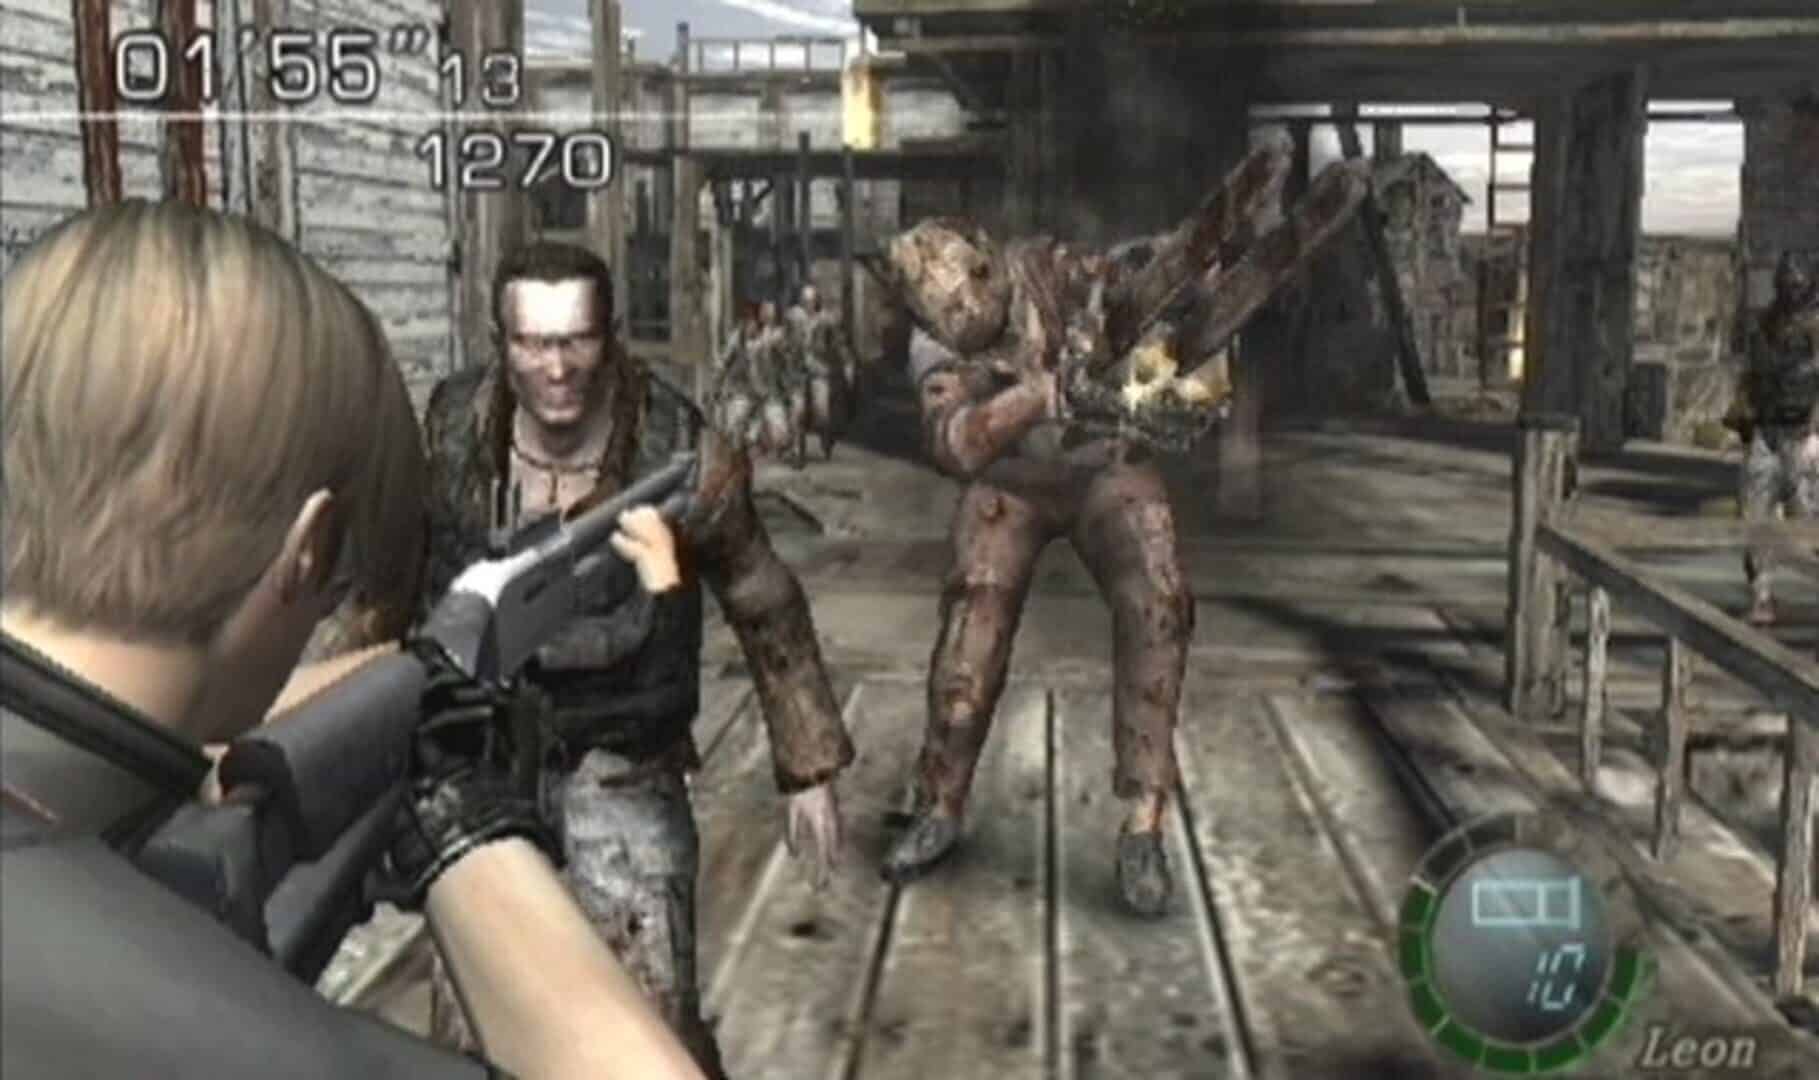 Resident Evil 3 Remake art has been spotted on PSN